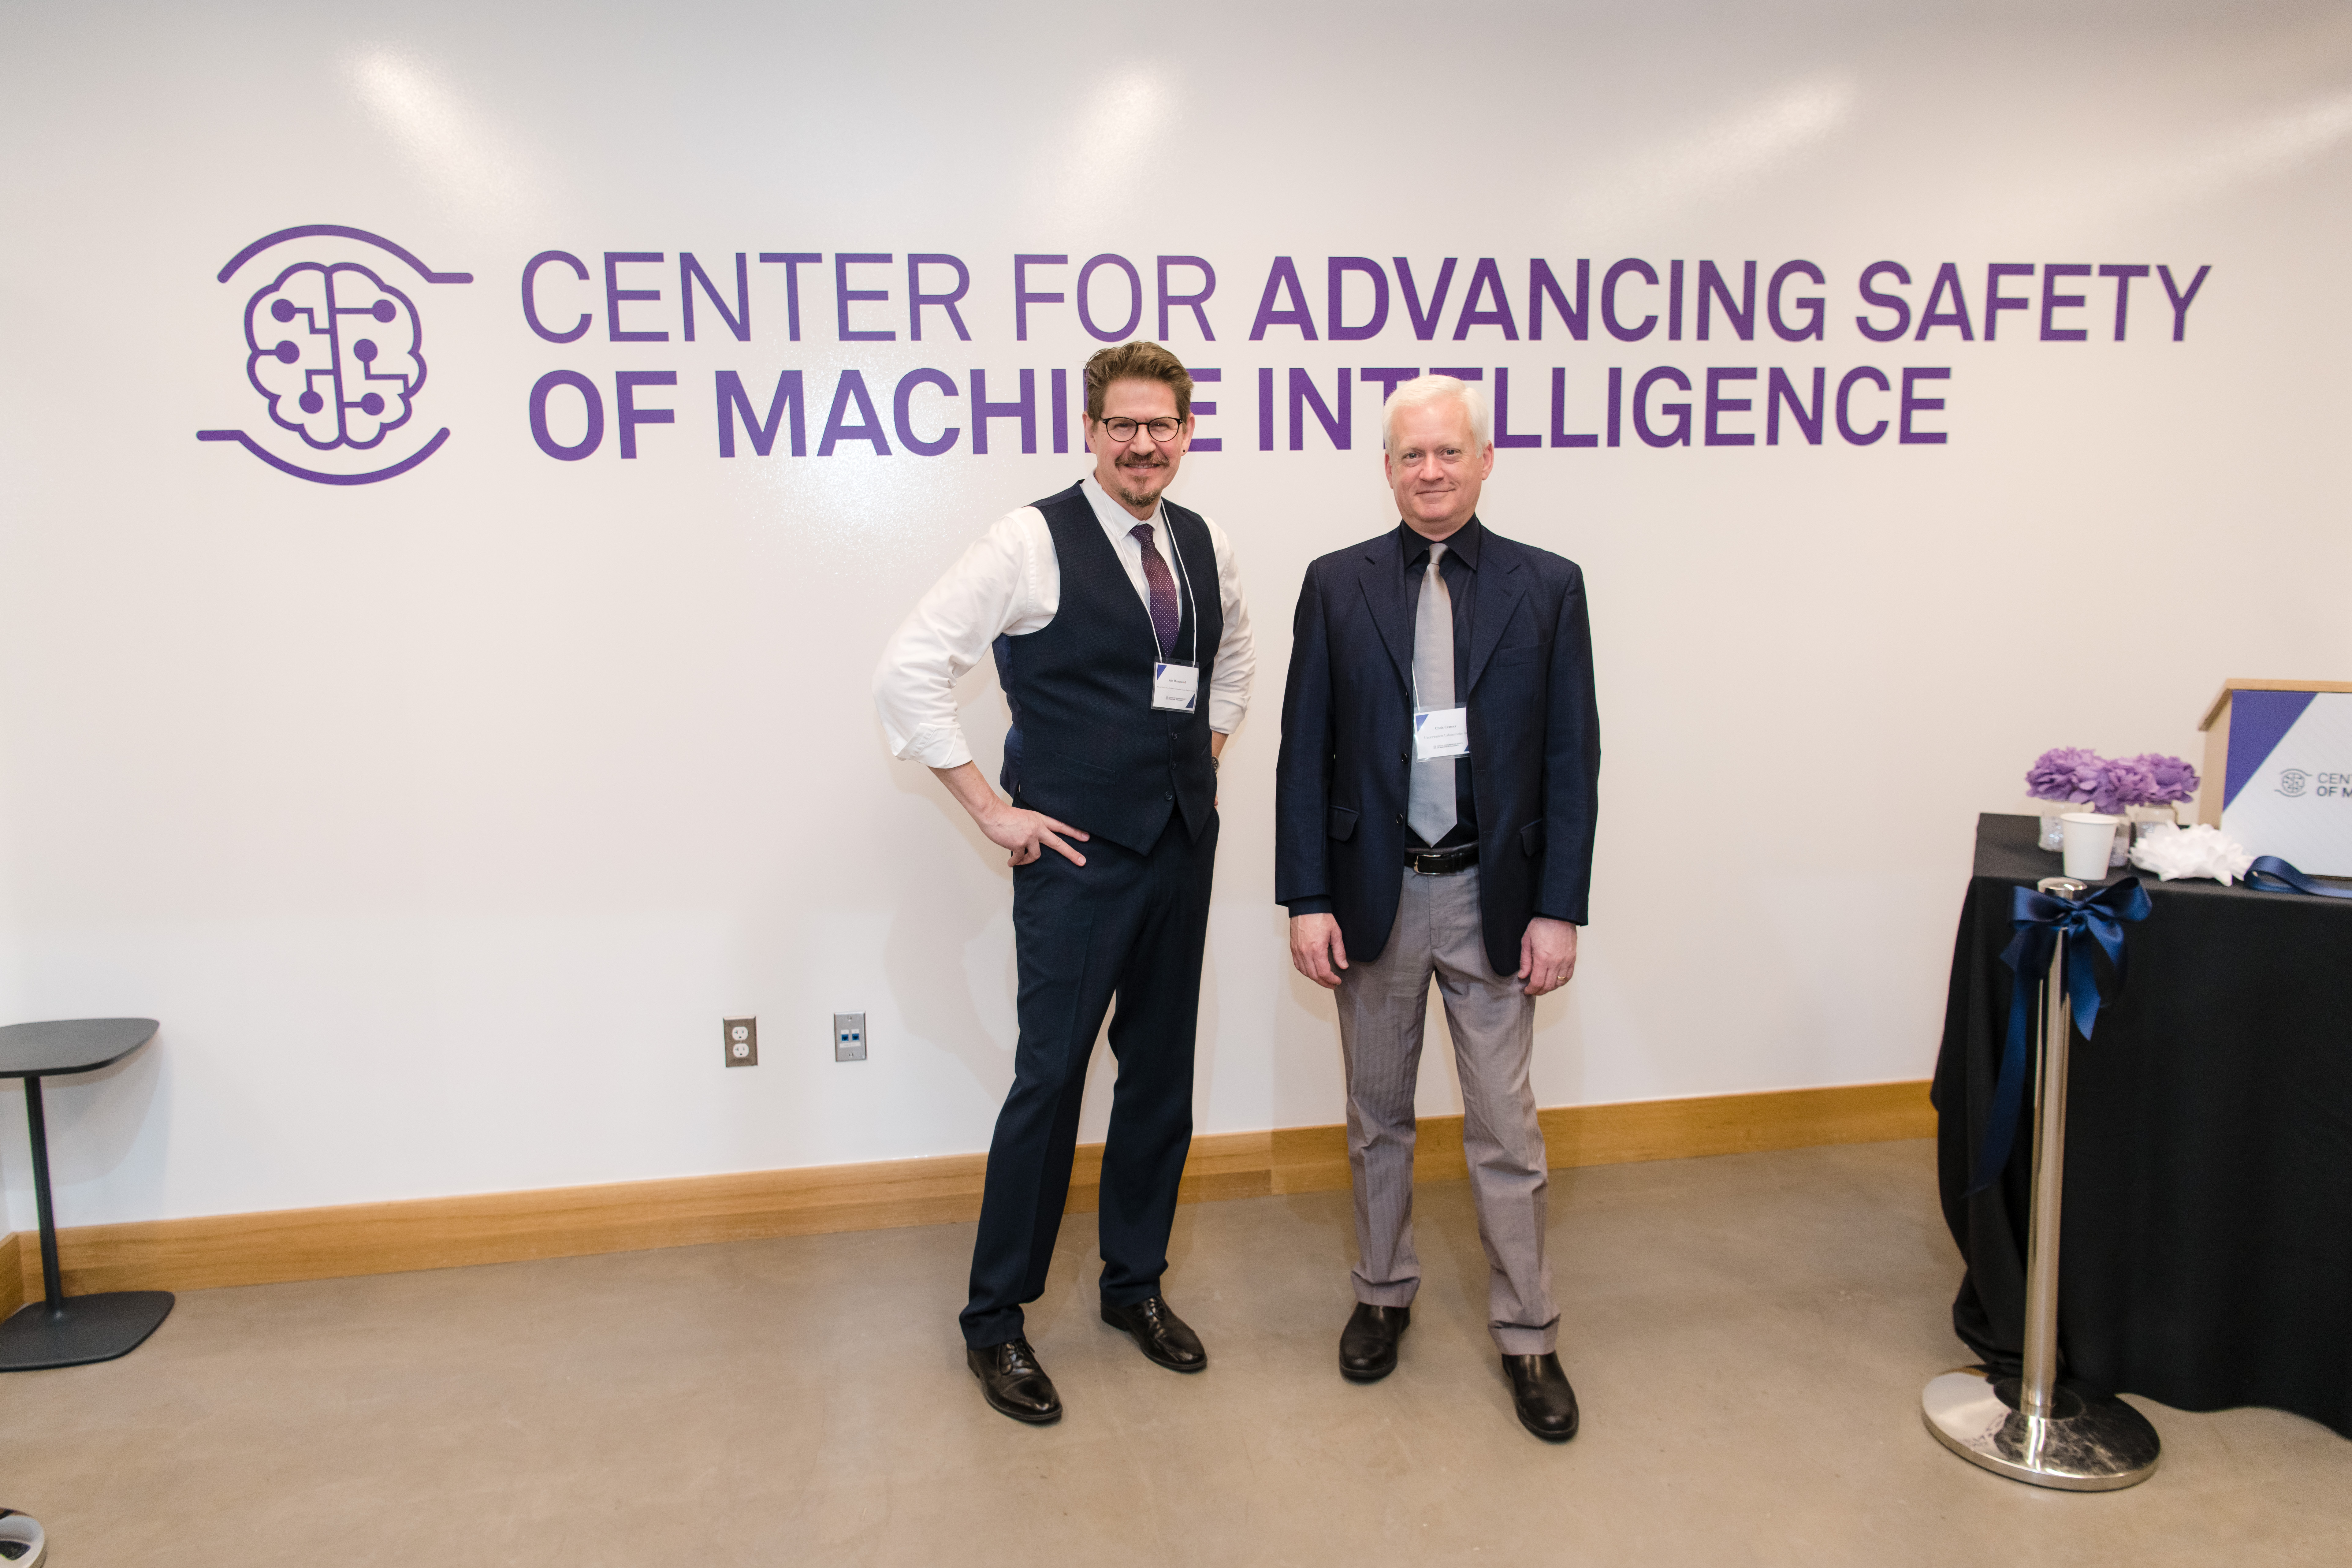 Center for Advancing Safety of Machine Intelligence (CASMI) Director Kristian Hammond and UL Research Institutes Chief Research Officer Chris Cramer at the CASMI launch event in April 2022. CASMI was recently named to the top 100 finalists for the Chicago Innovation Awards.”